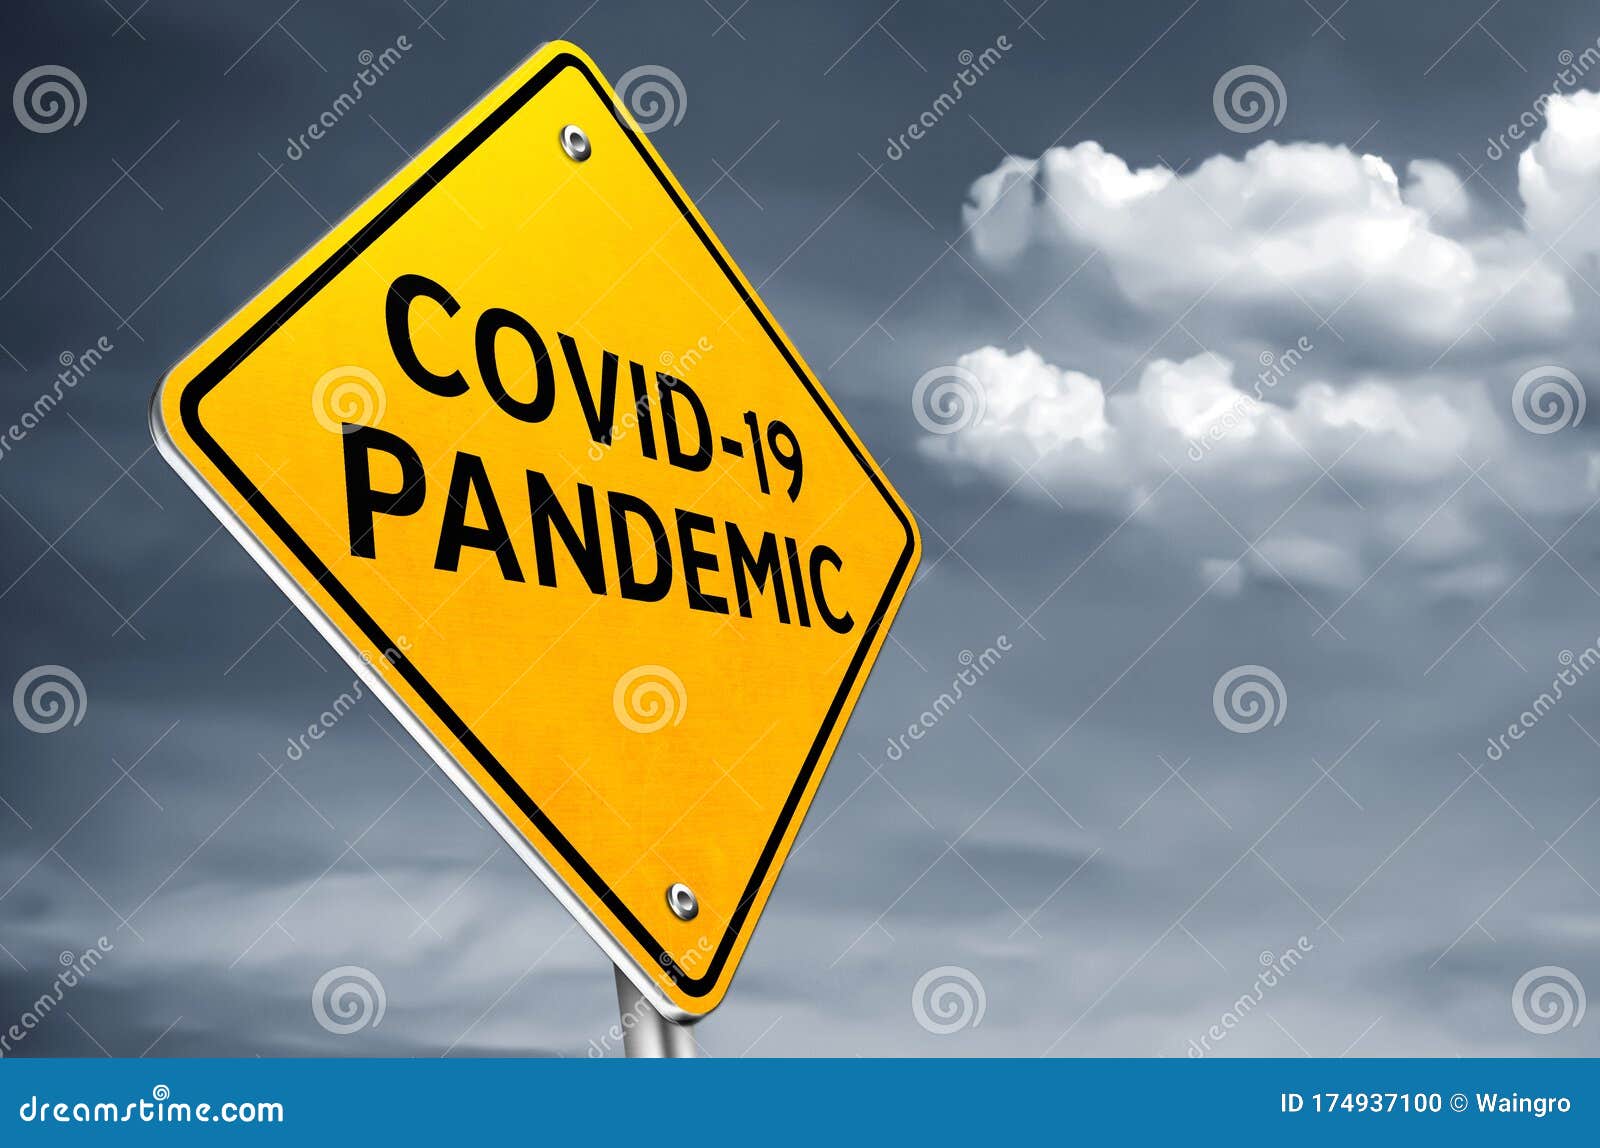 covid 19 pandemic - roadsign message